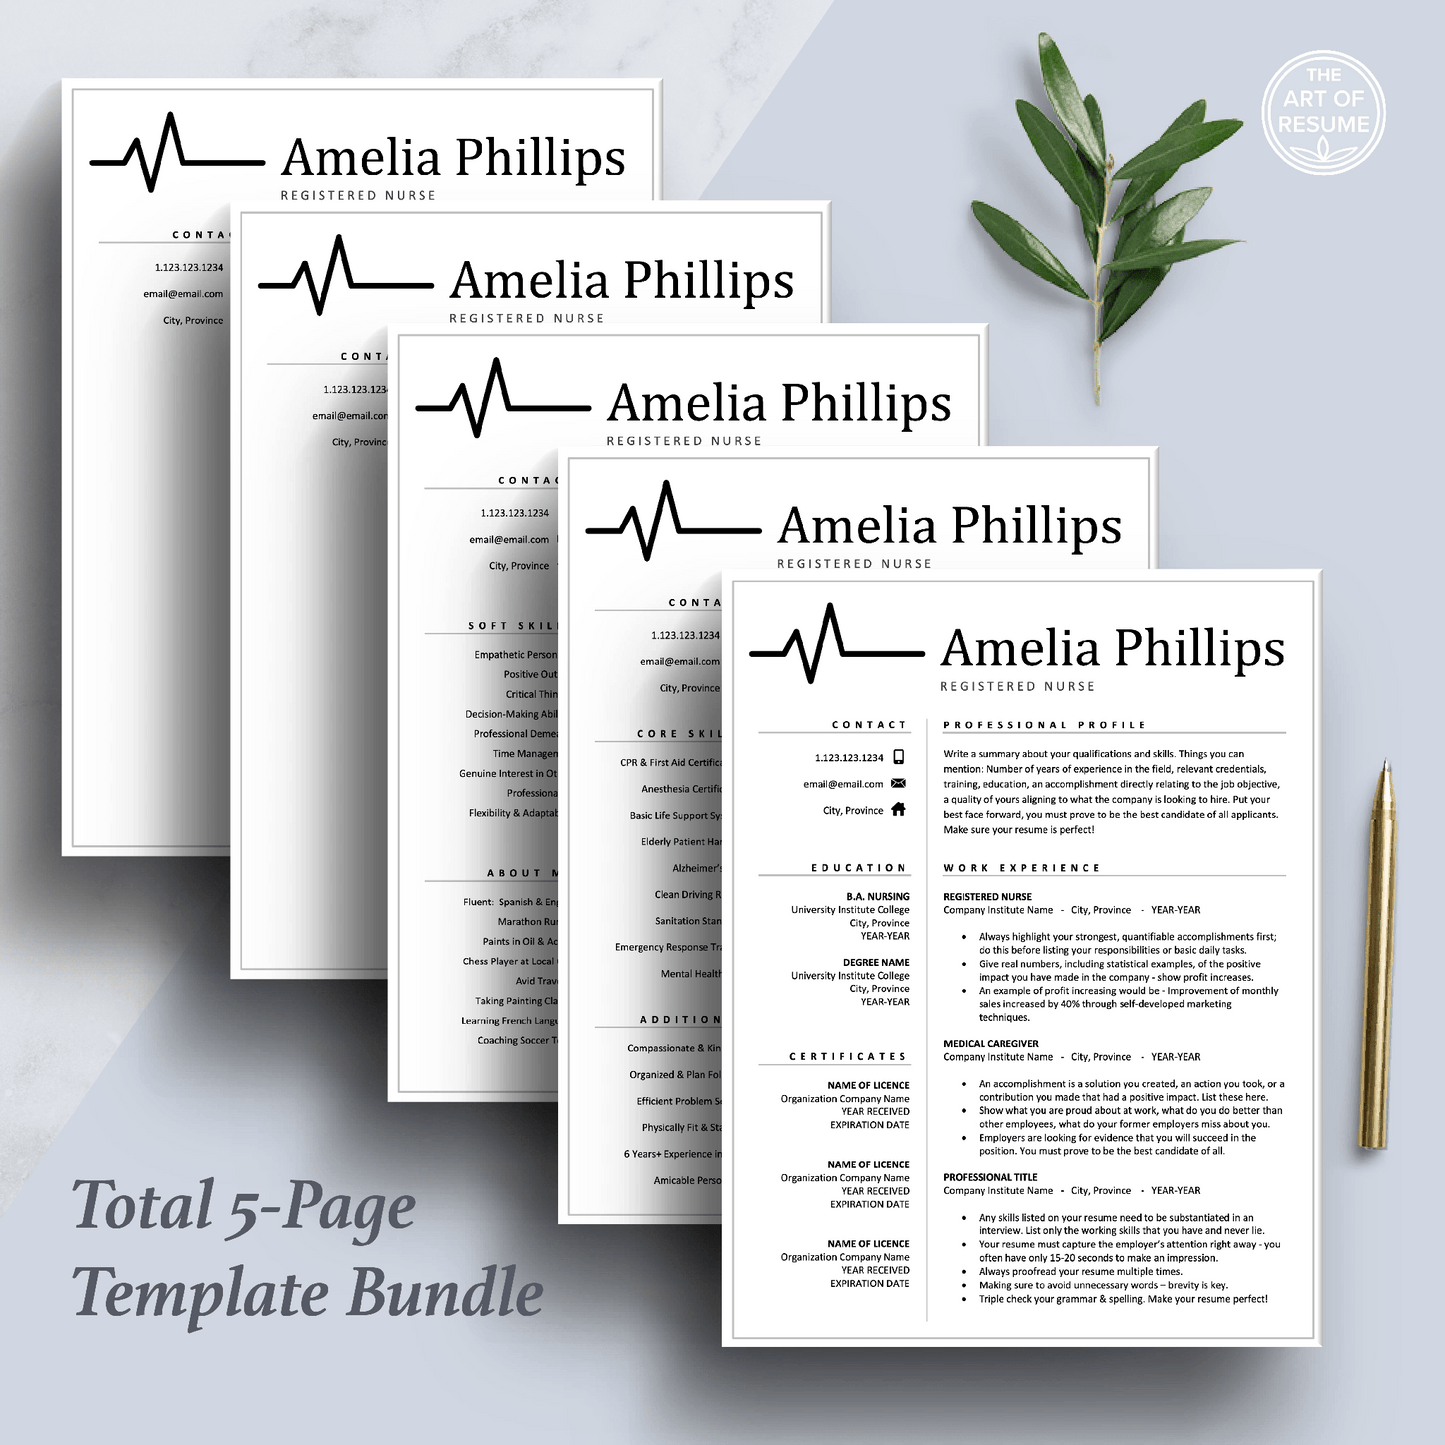 Medical Resume Template | Curriculum Vitae for RN Nurse, Doctor, Physician - The Art of Resume